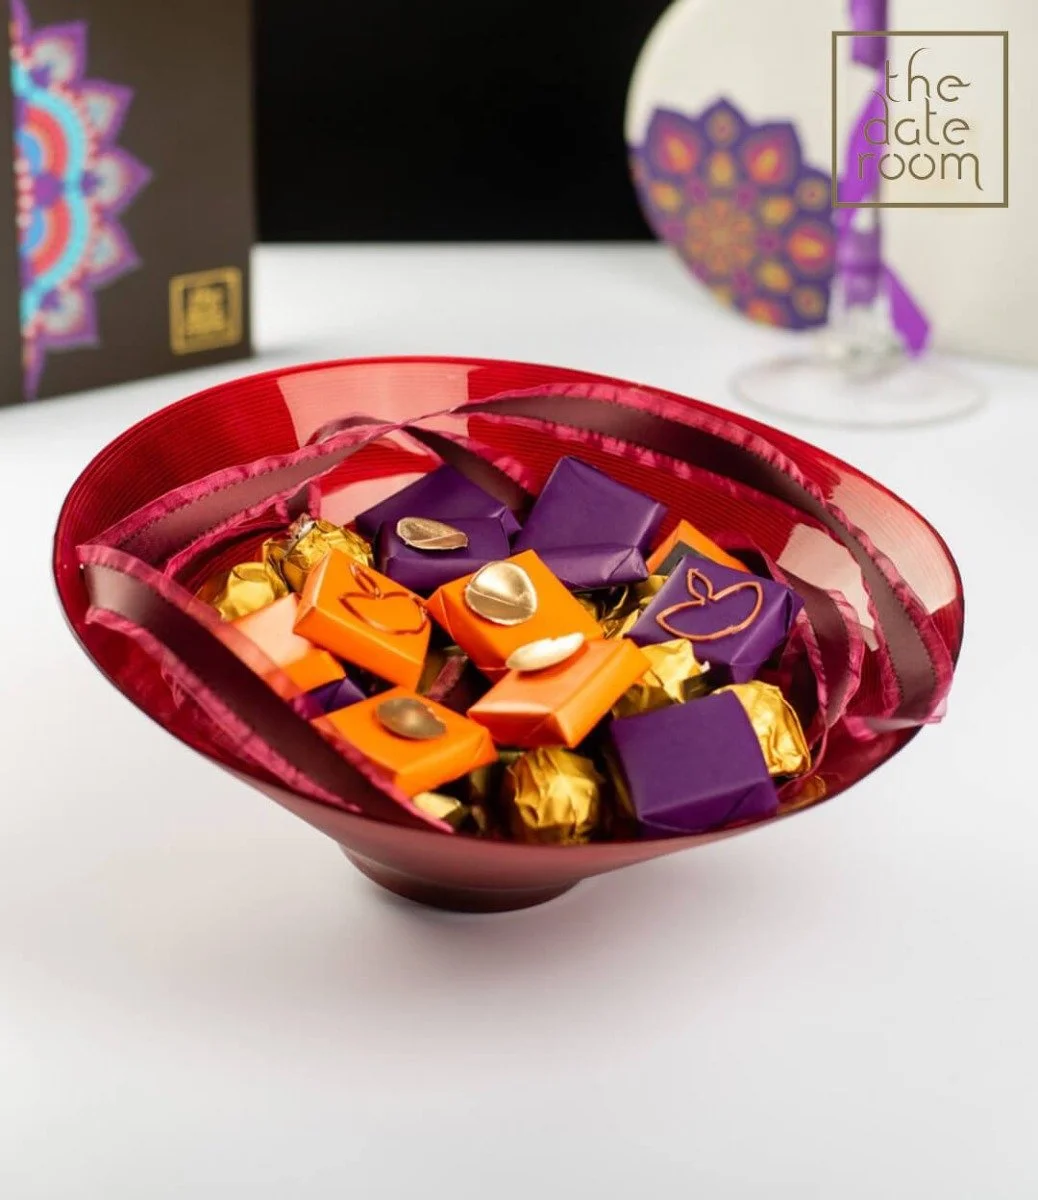 Diwali Chocolate and Truffles Red Tray By The Date Room 